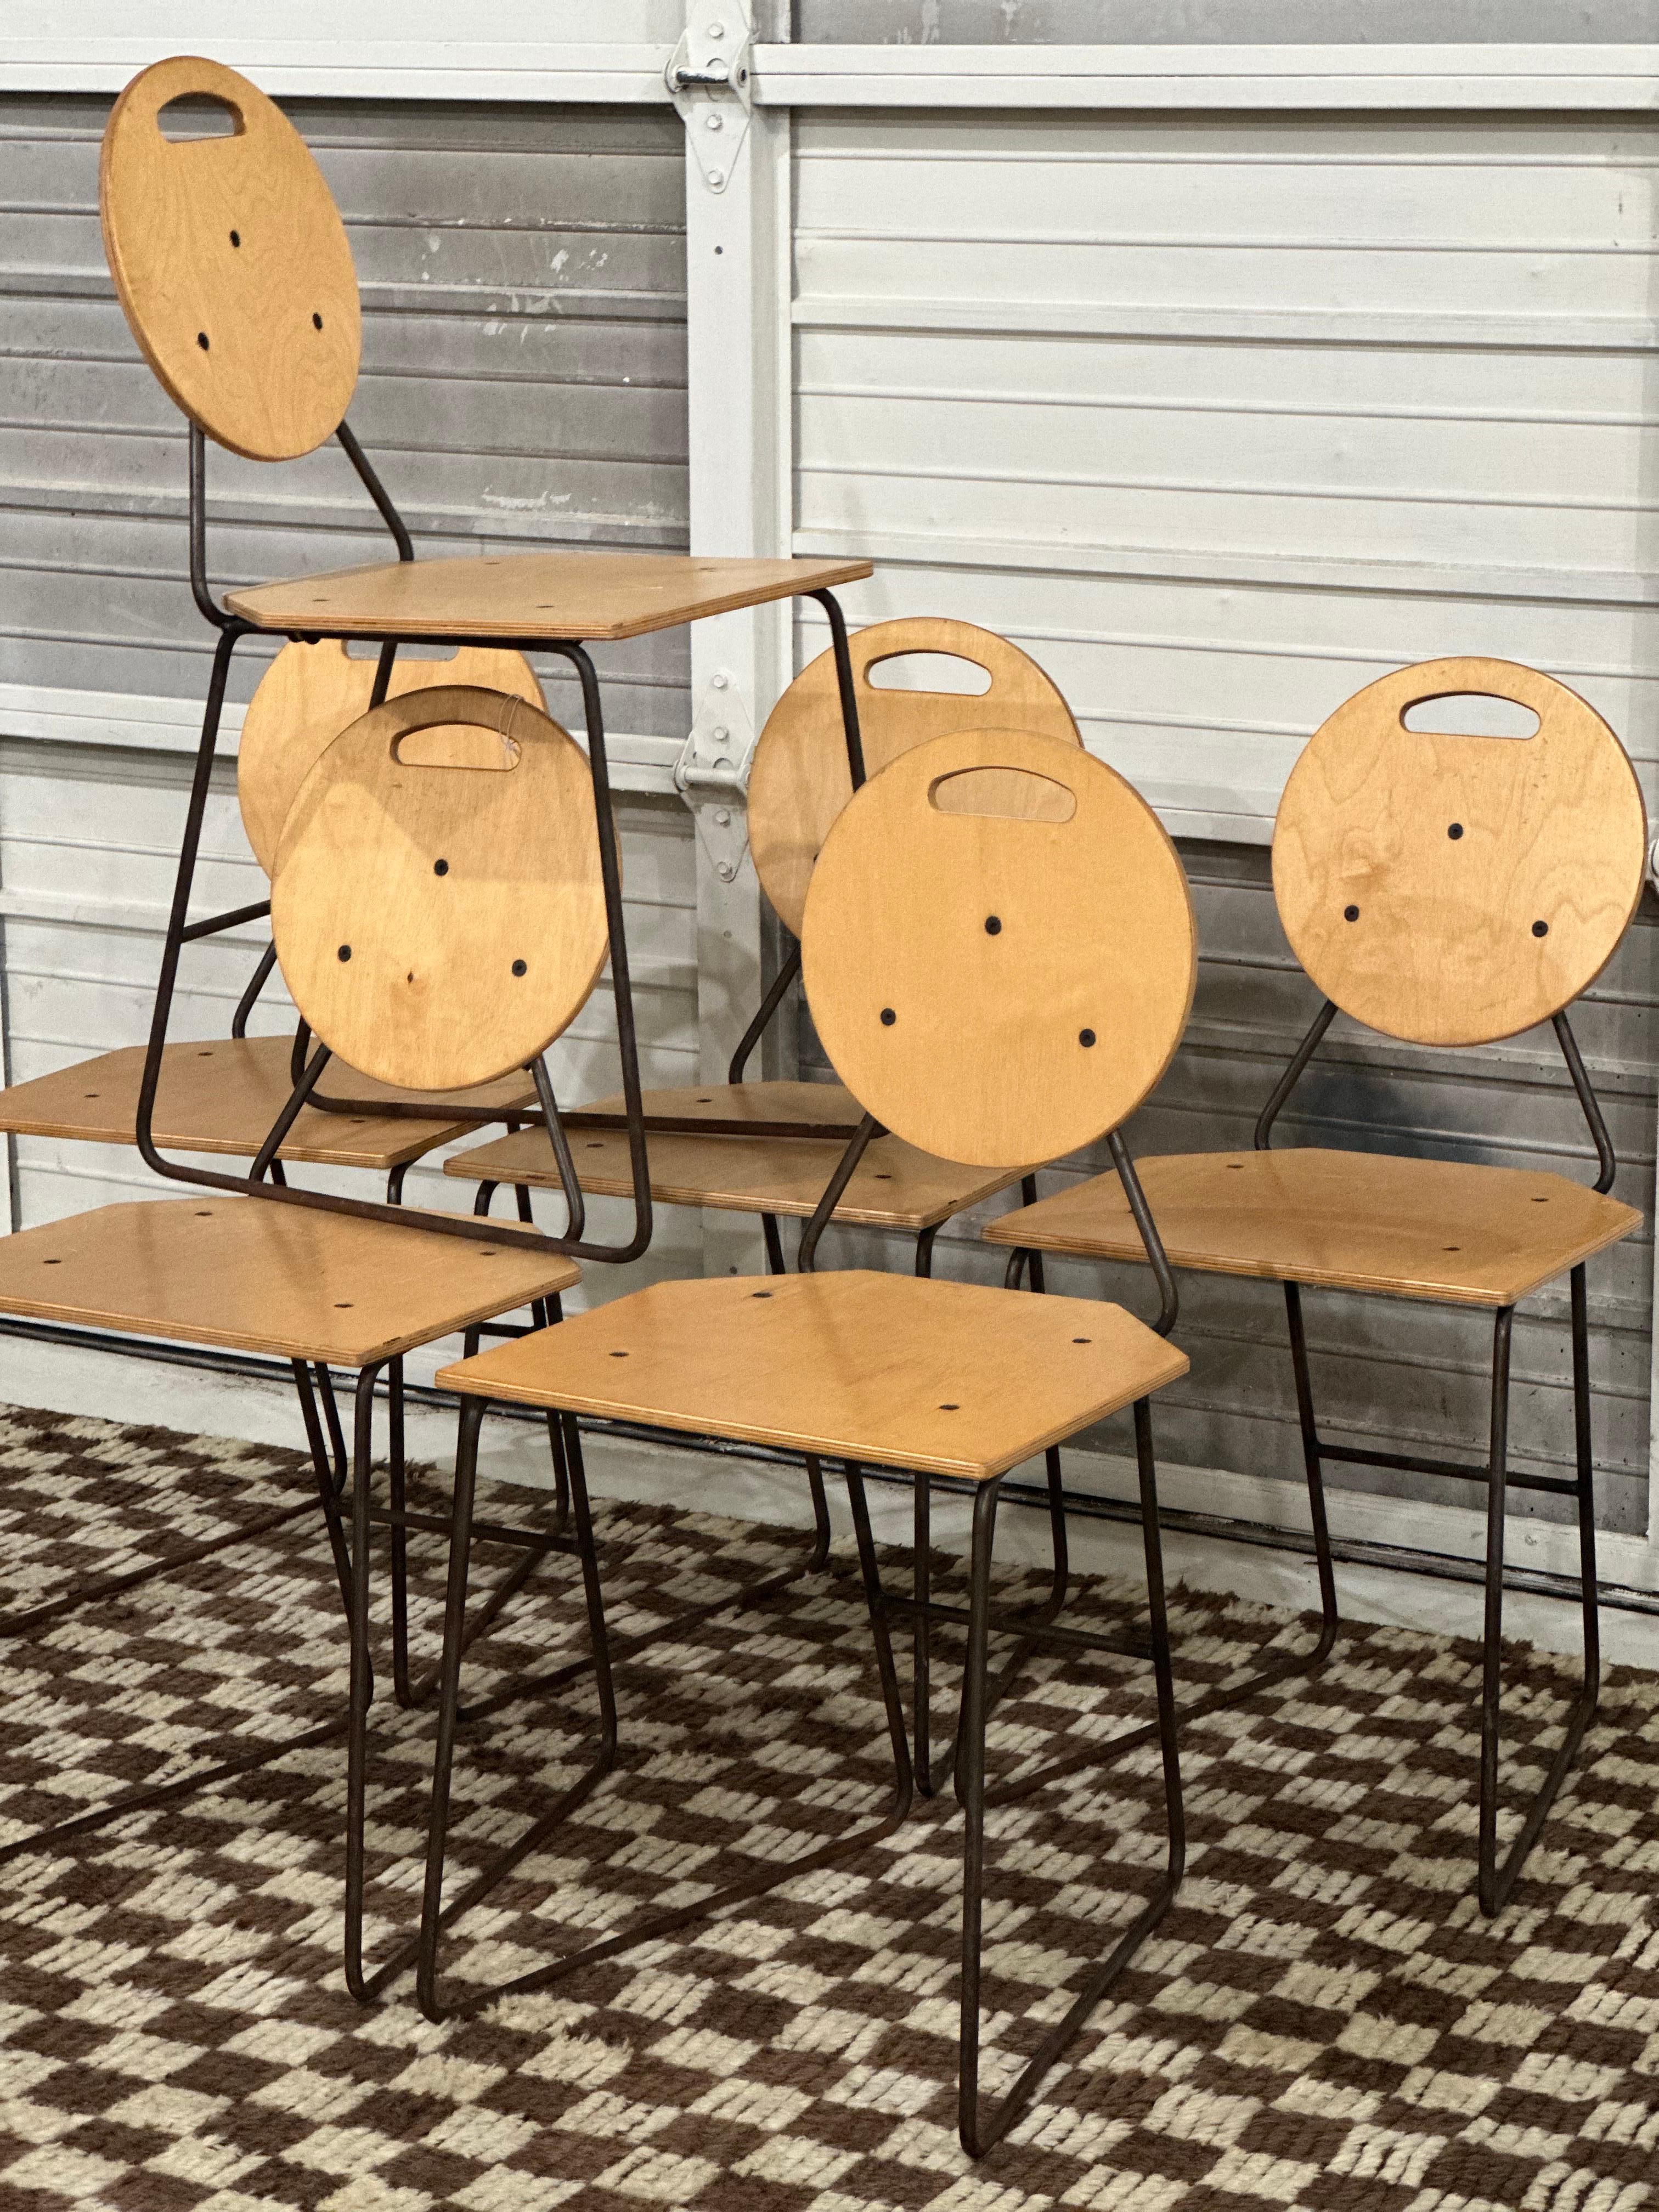 Set of 6 plywood and iron post-modern industrial style dining height chairs in the manner of Bruce Gueswel. Minor scratches and fading consistent with age. Some light rust present on iron frame. Chairs are in otherwise excellent vintage condition